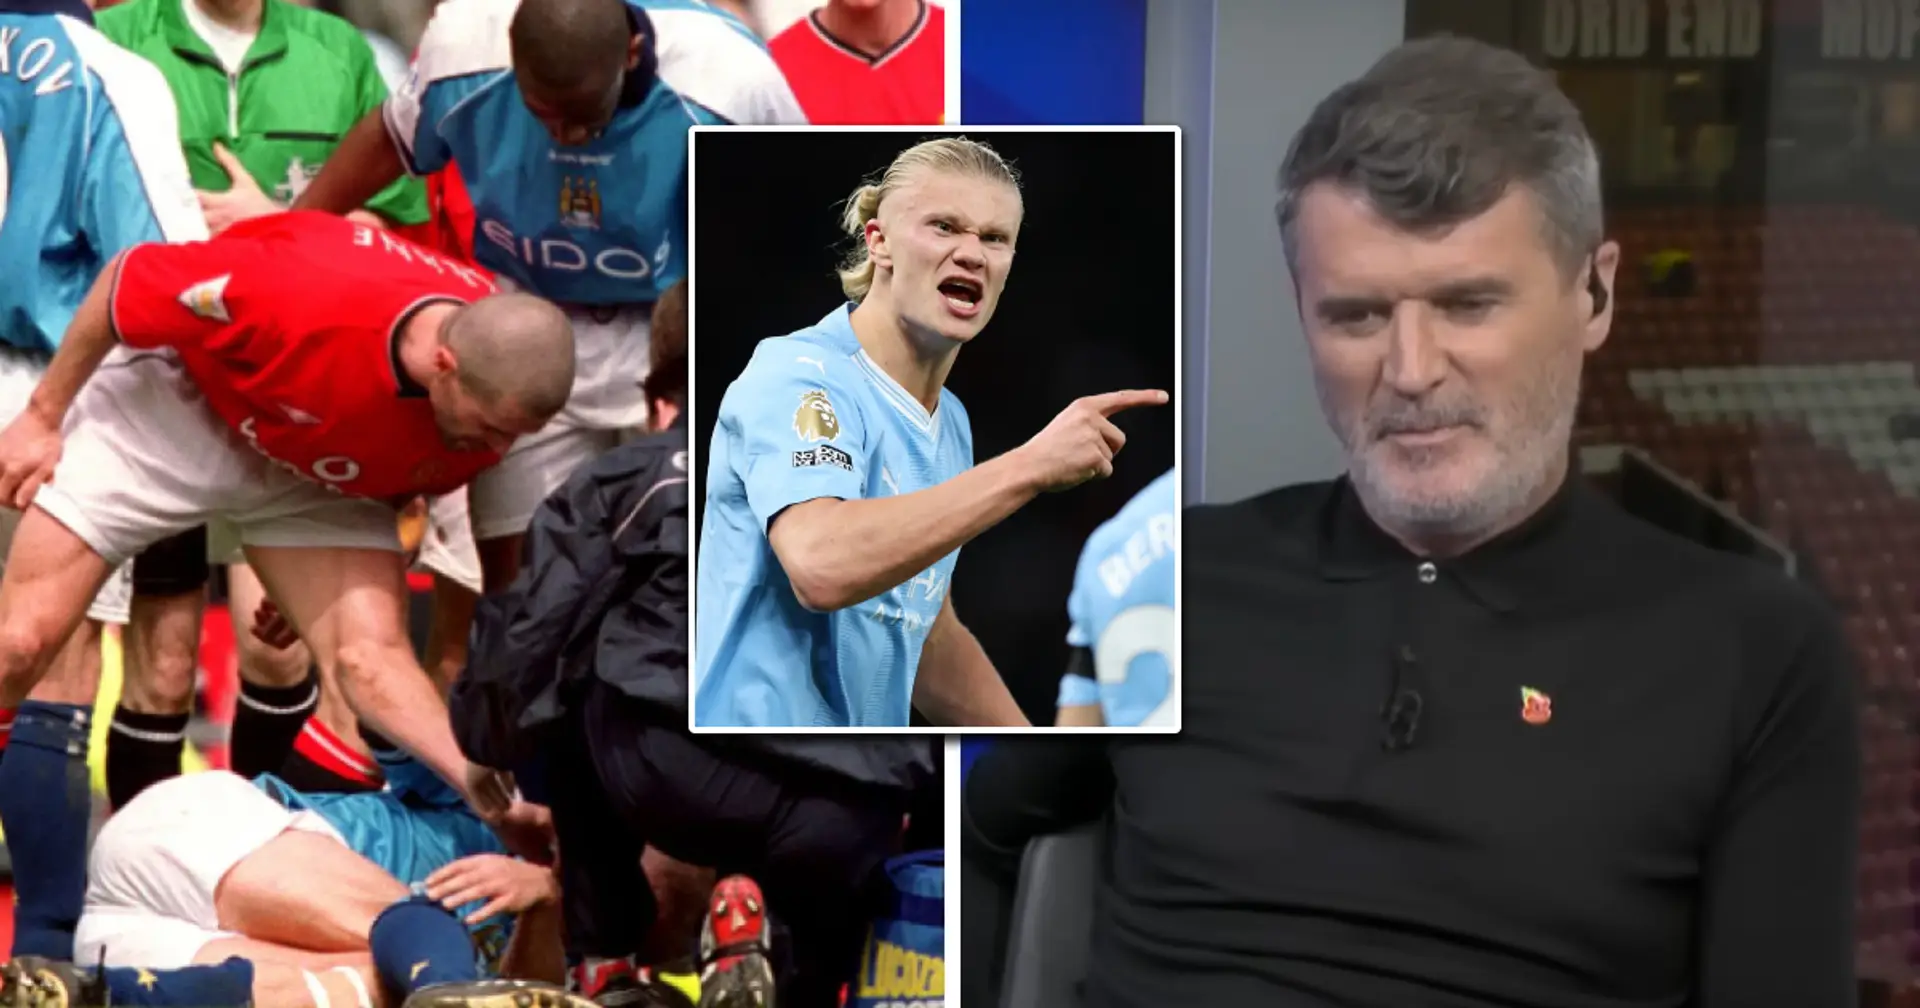 'I don’t know': Roy Keane reacts to Erling Haaland taunts in Manchester derby